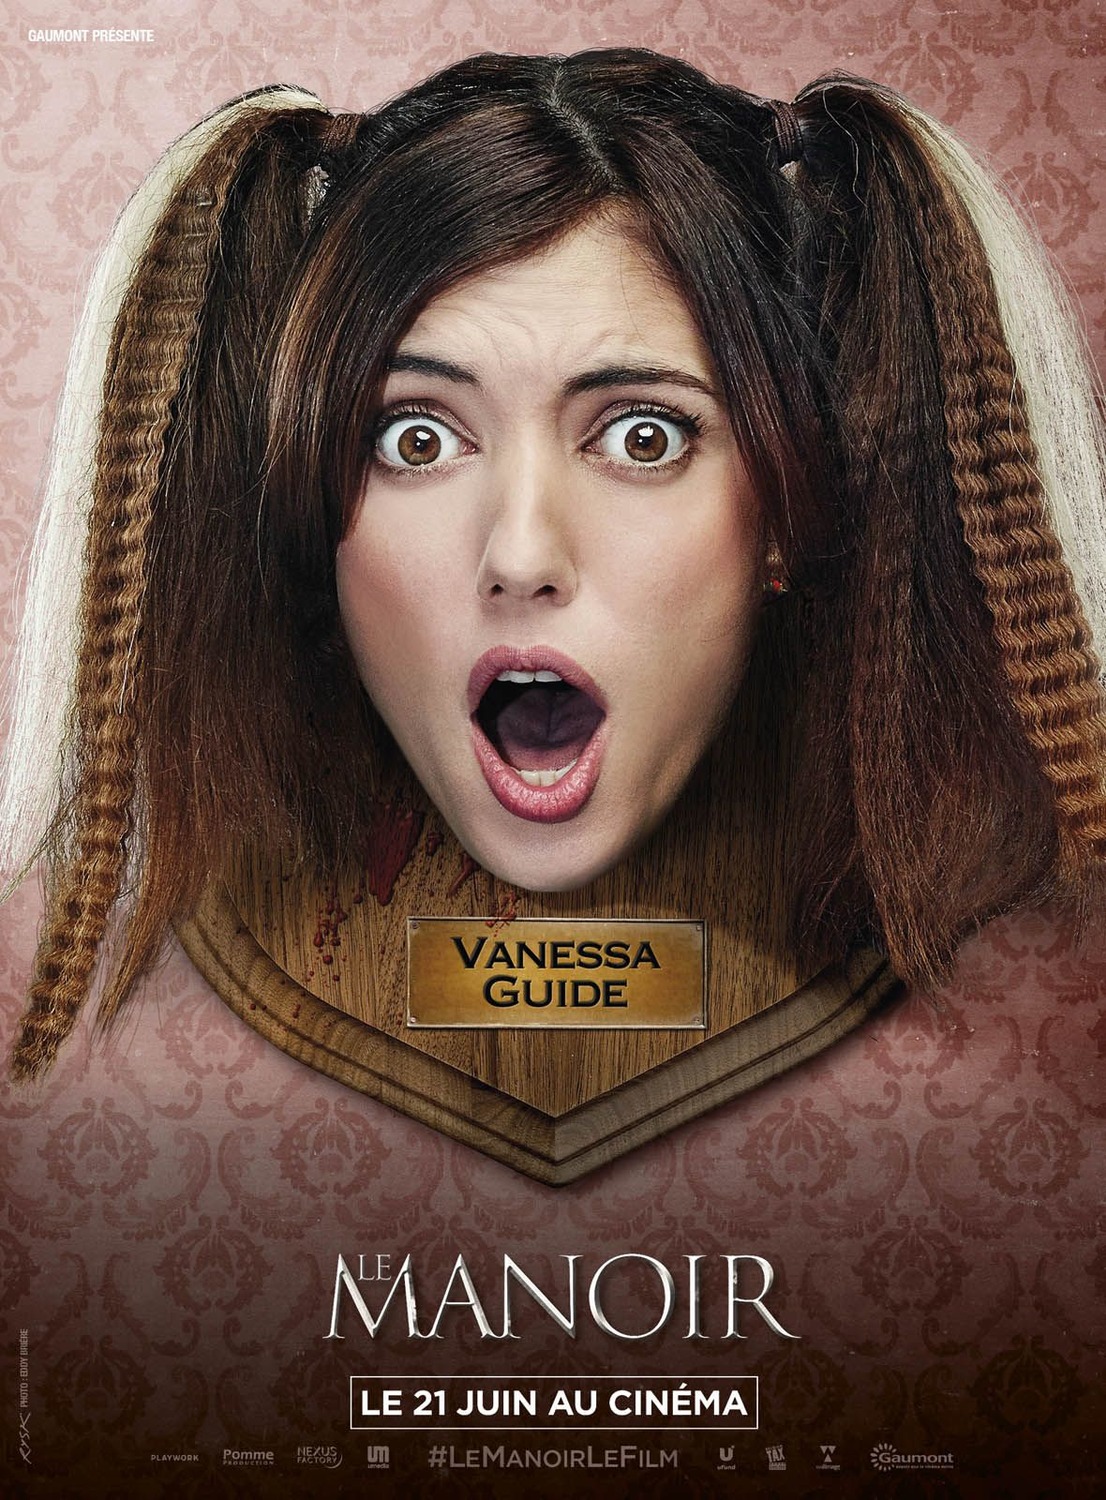 Extra Large Movie Poster Image for Le manoir (#7 of 11)